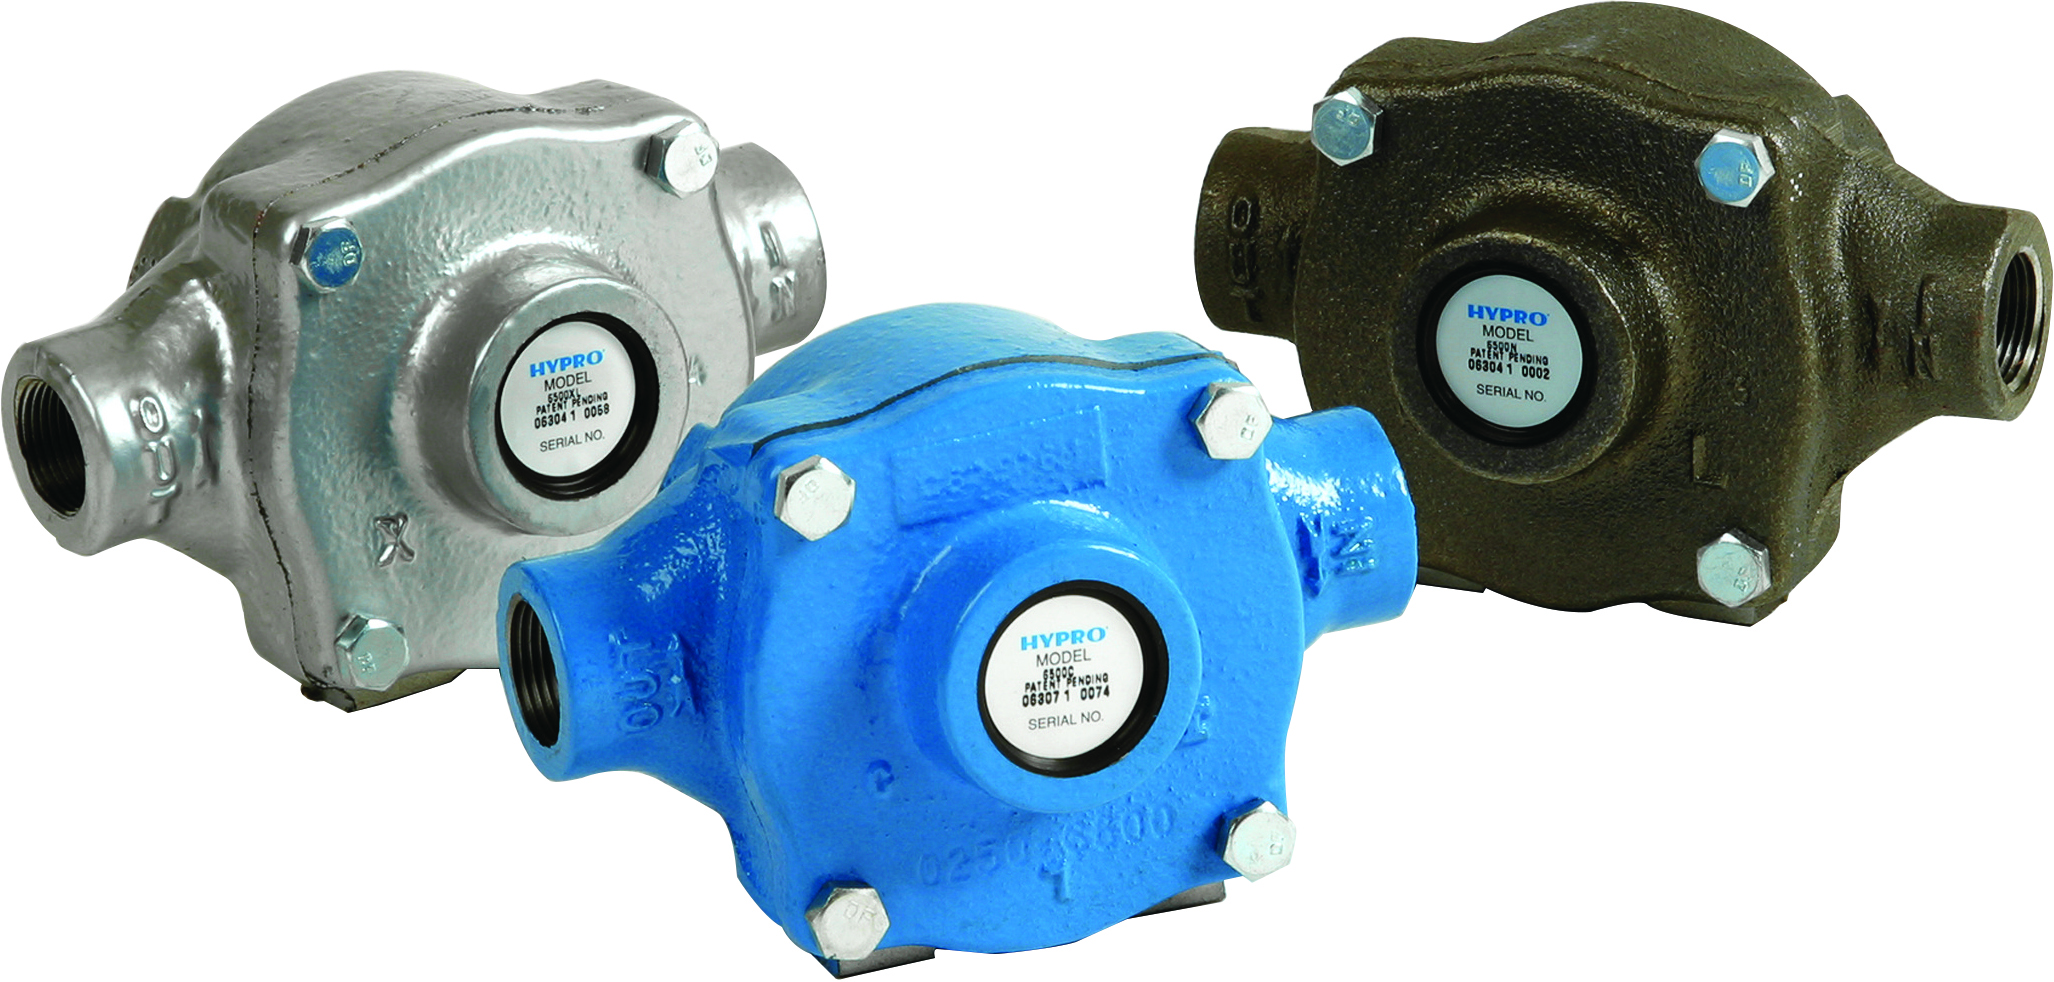 Hypro 6500 Series - 6 Roller, Cast Iron, Ni-Resist or Silver Series XL Roller Pumps